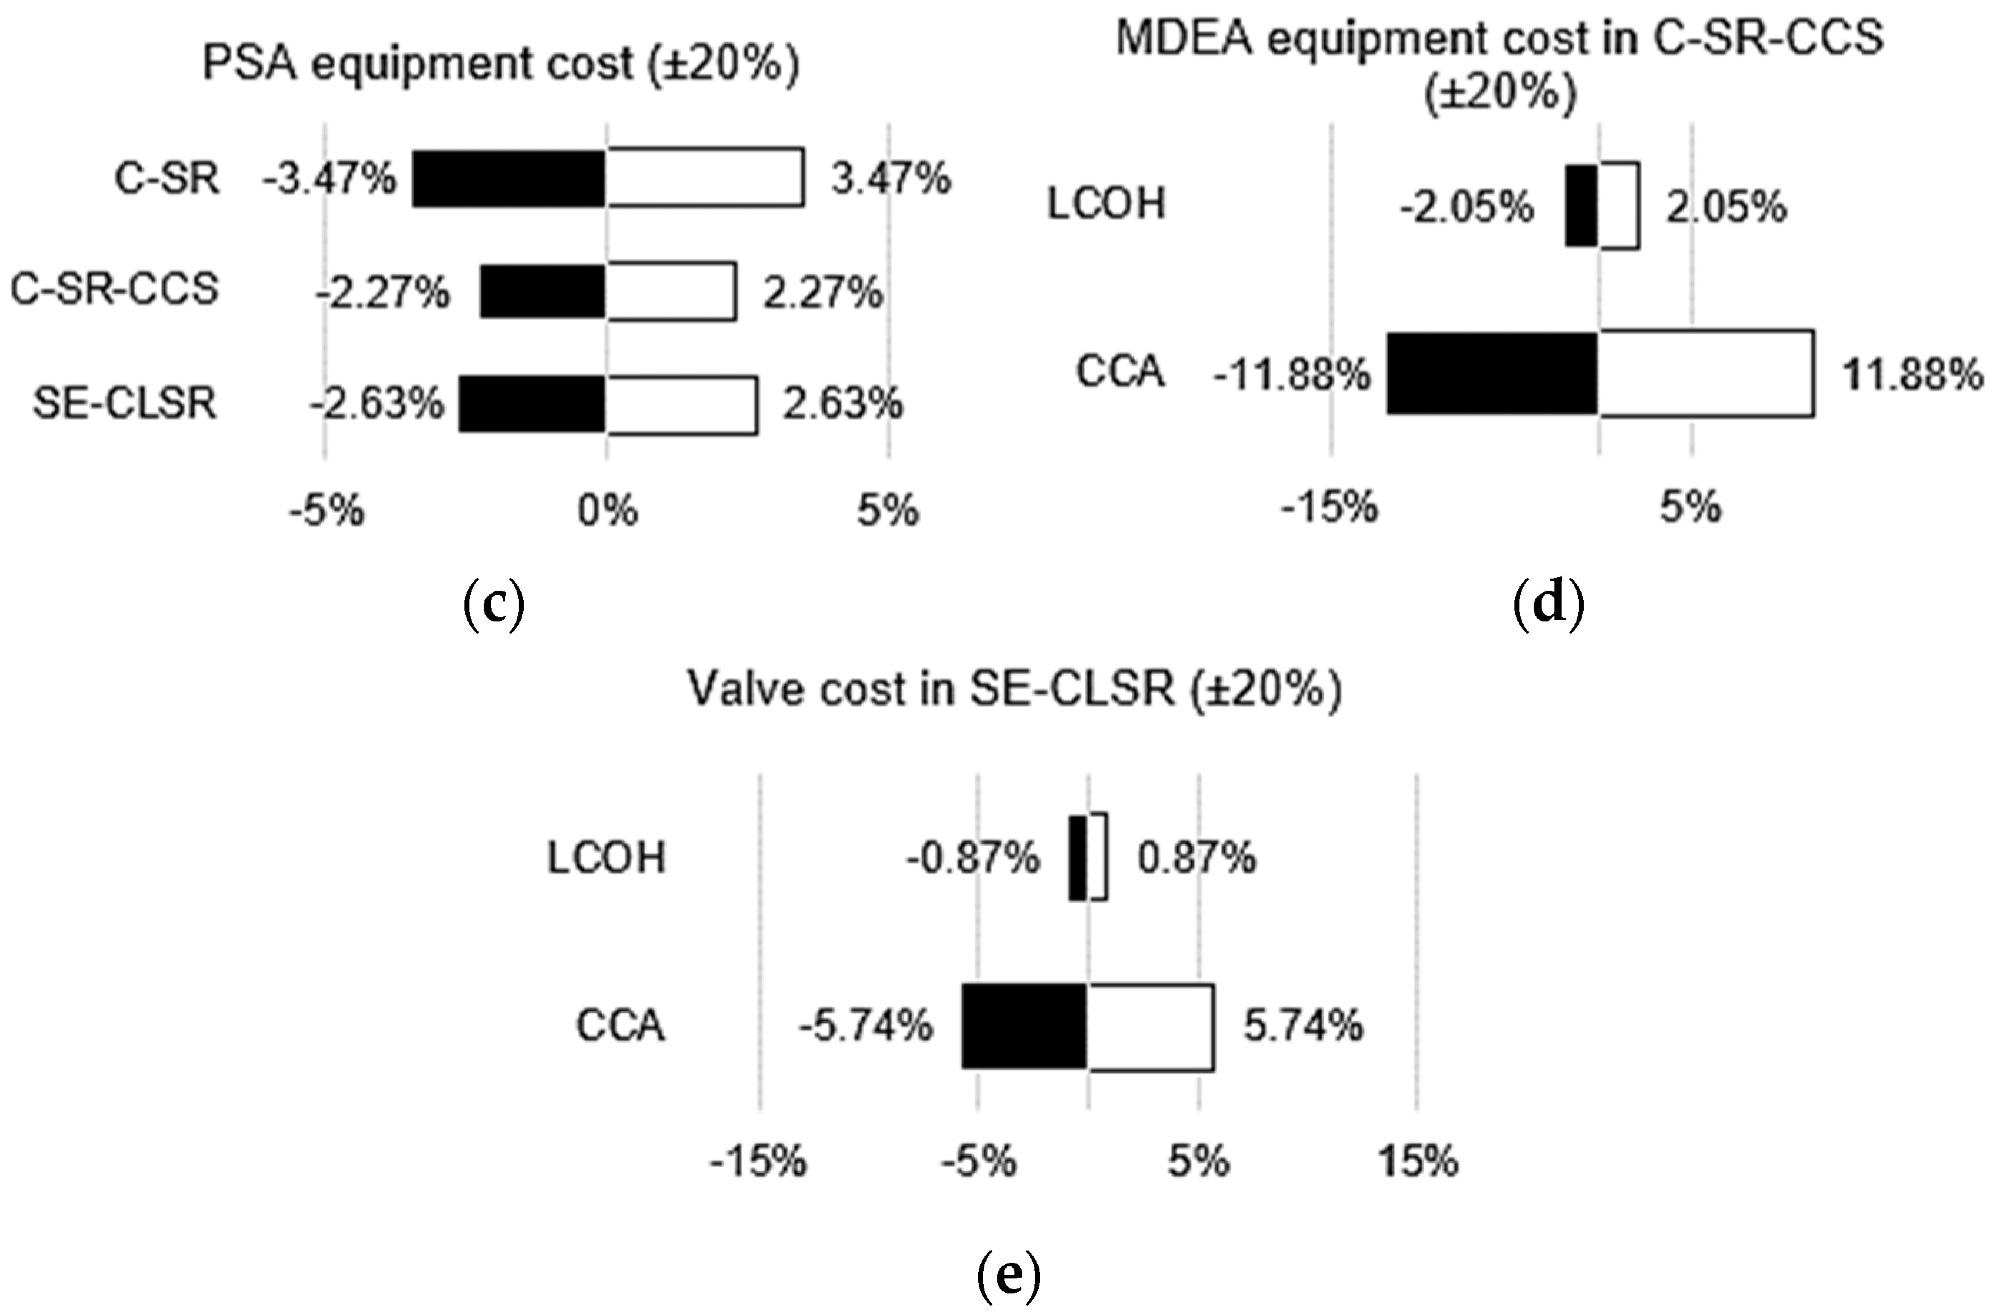 Various economic sensitivity analyses: (a) effect of bio-oil price on LCOH; (b) effect of natural gas price on LCOH; (c) effect of PSA equipment cost on LCOH; (d) effect of MDEA cost on LCOH and CCA for C-SR-CCS; (e) effect of valve cost on LCOH and CCA for SE-CLSR.